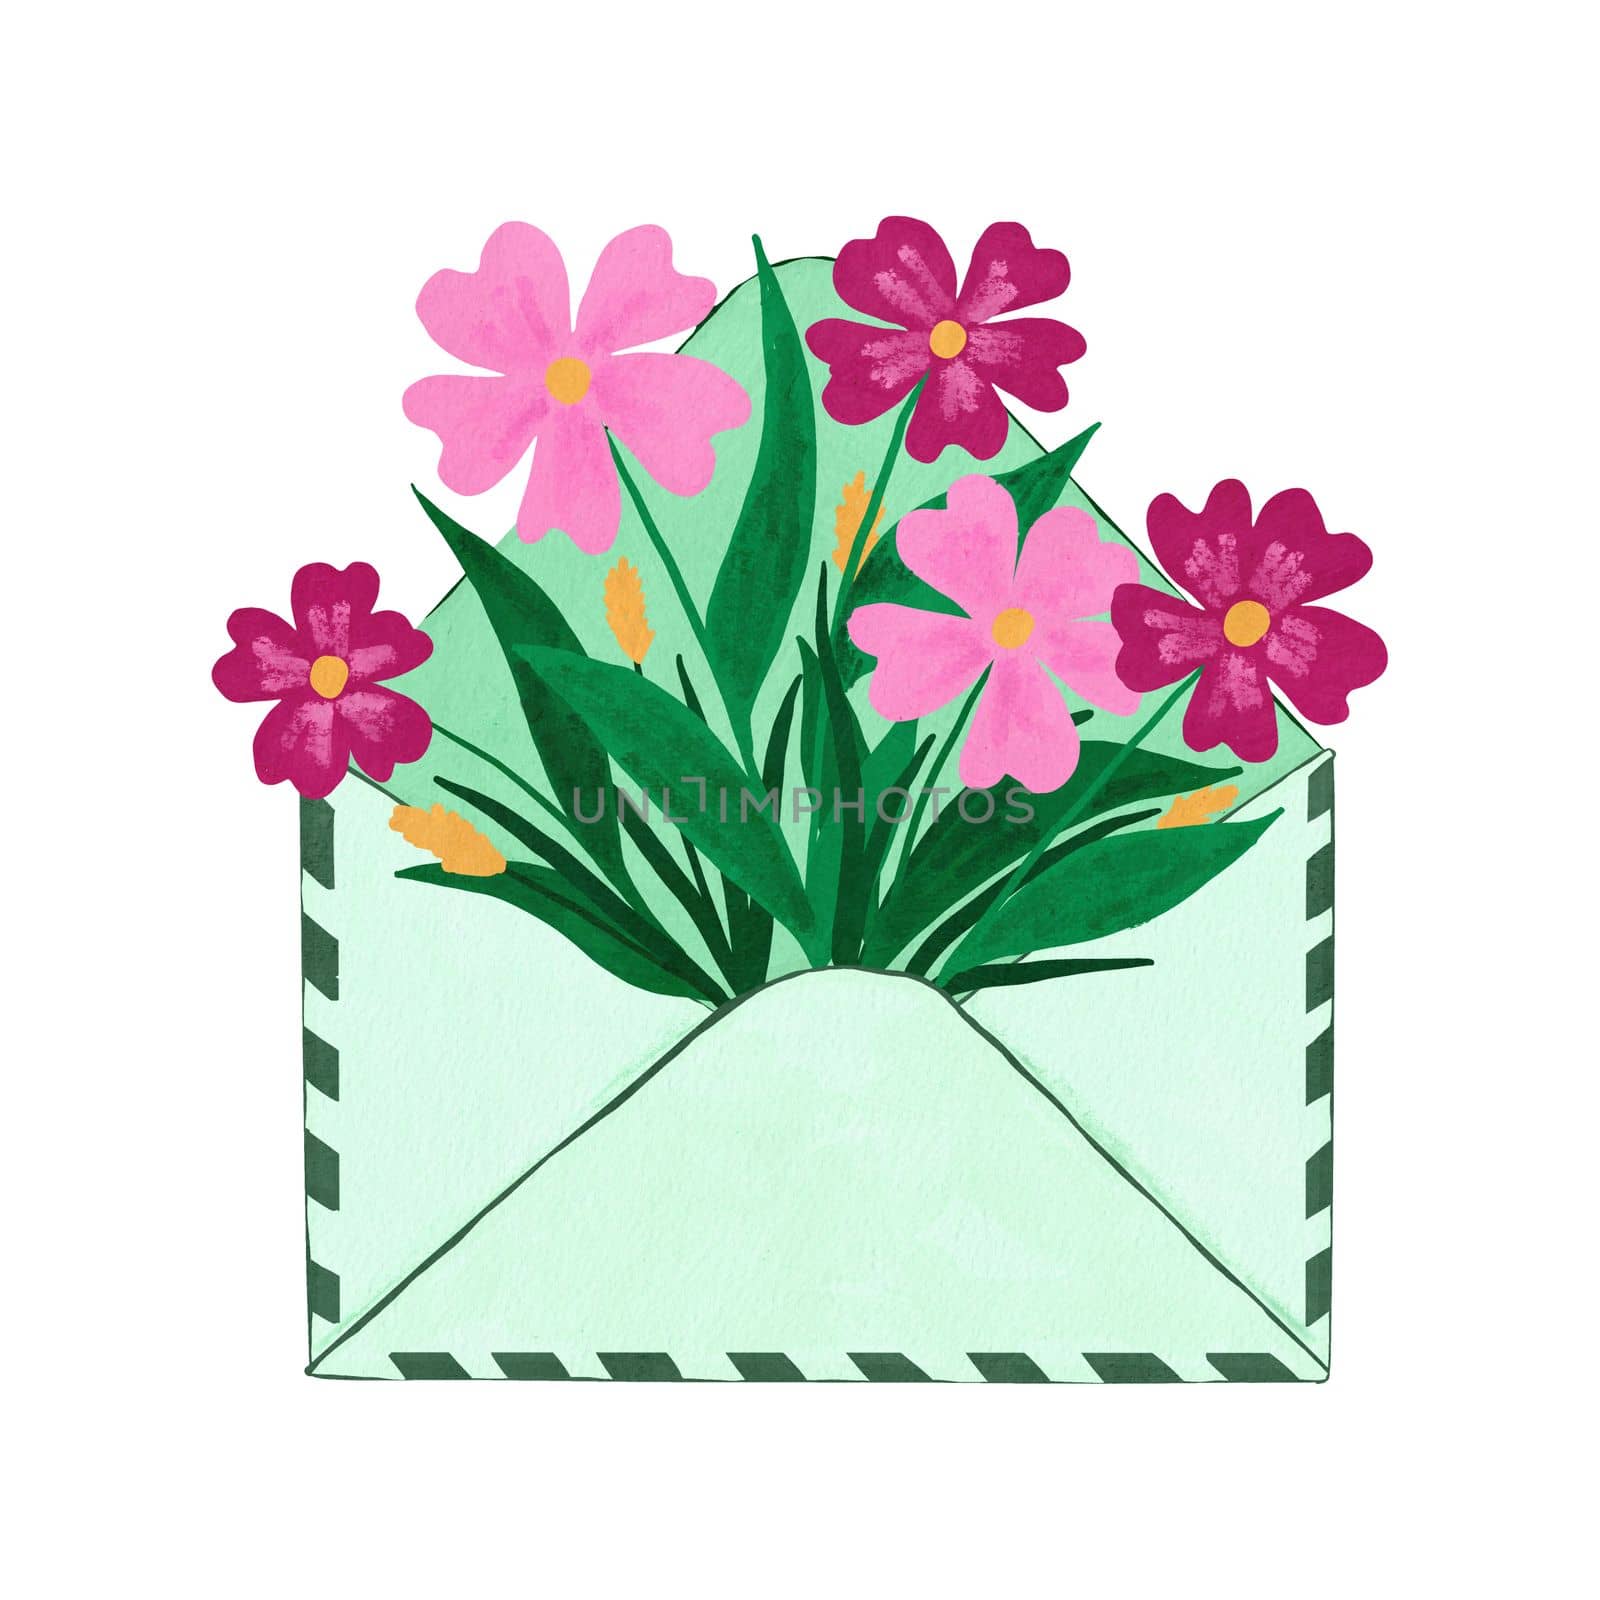 Hand drawn illustration of open letter envelope mailing list, sending business information invitation card. Pink spring summer flowers in green leaves red floral foliage, love thank you card . by Lagmar